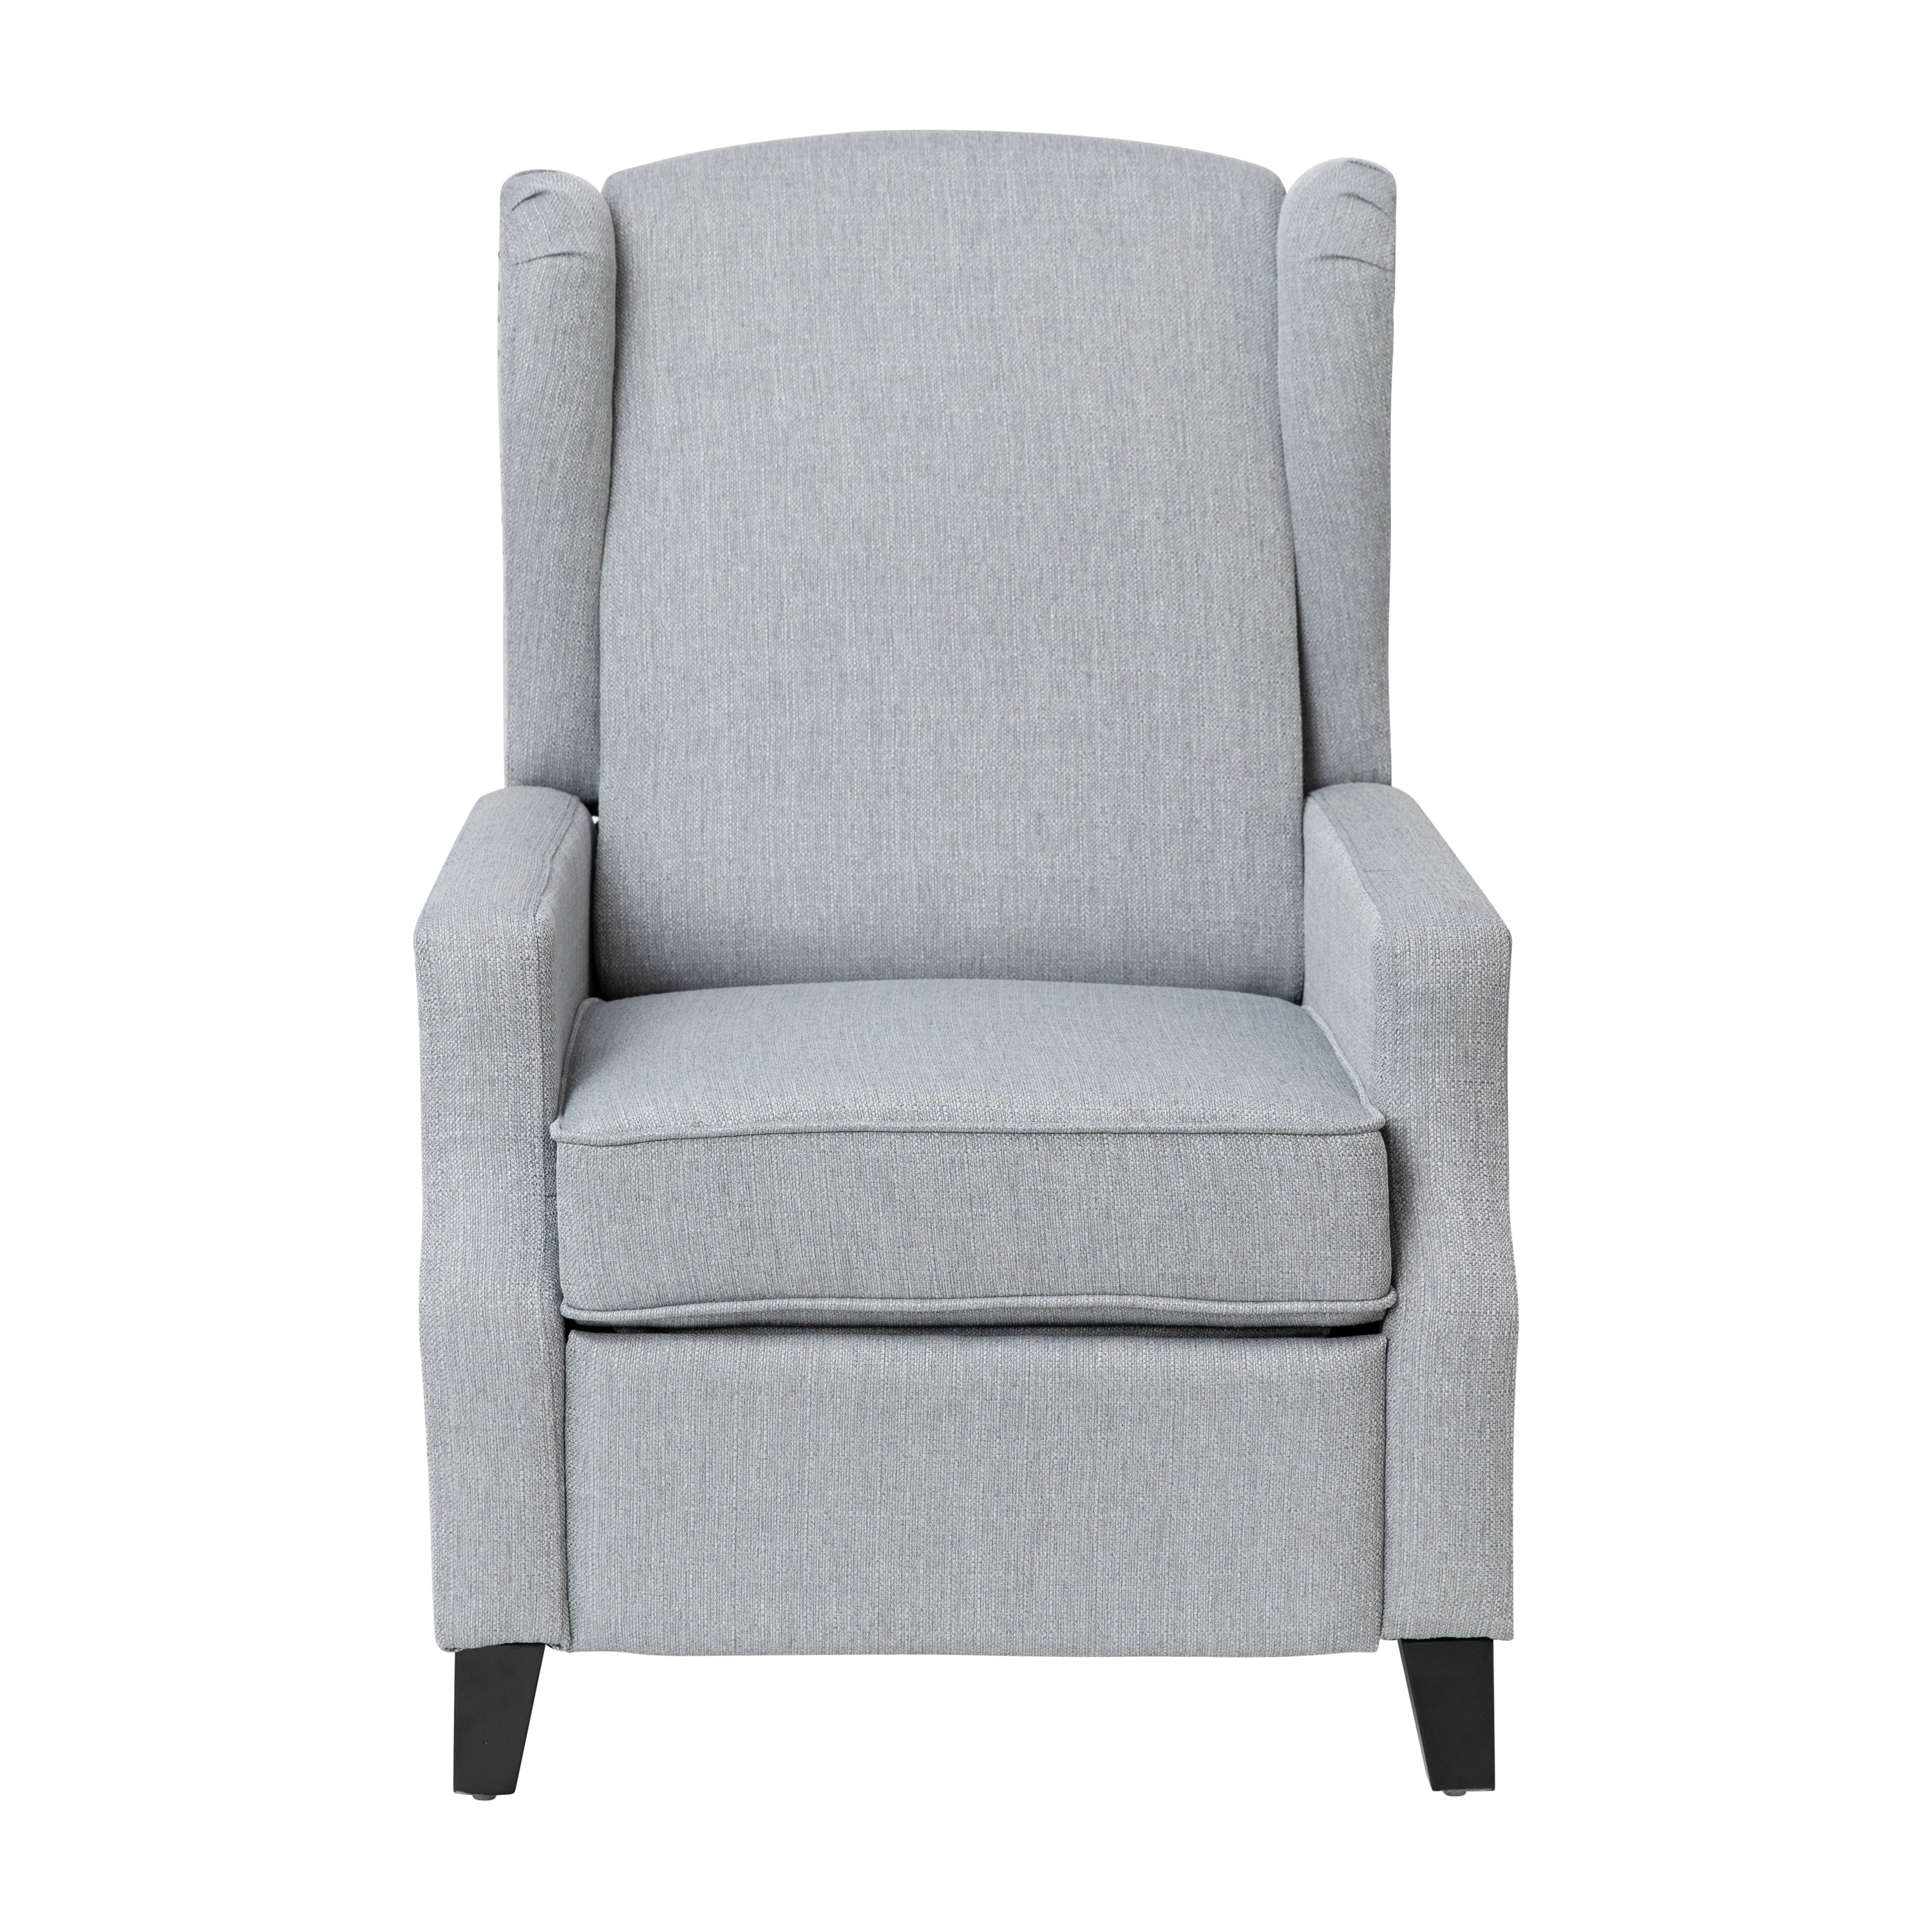 Prescott Traditional Style Slim Push Back Recliner Chair-Wingback Recliner with Polyester Fabric Upholstery-Accent Nail Trim-Push Back Recliners-Flash Furniture-Wall2Wall Furnishings